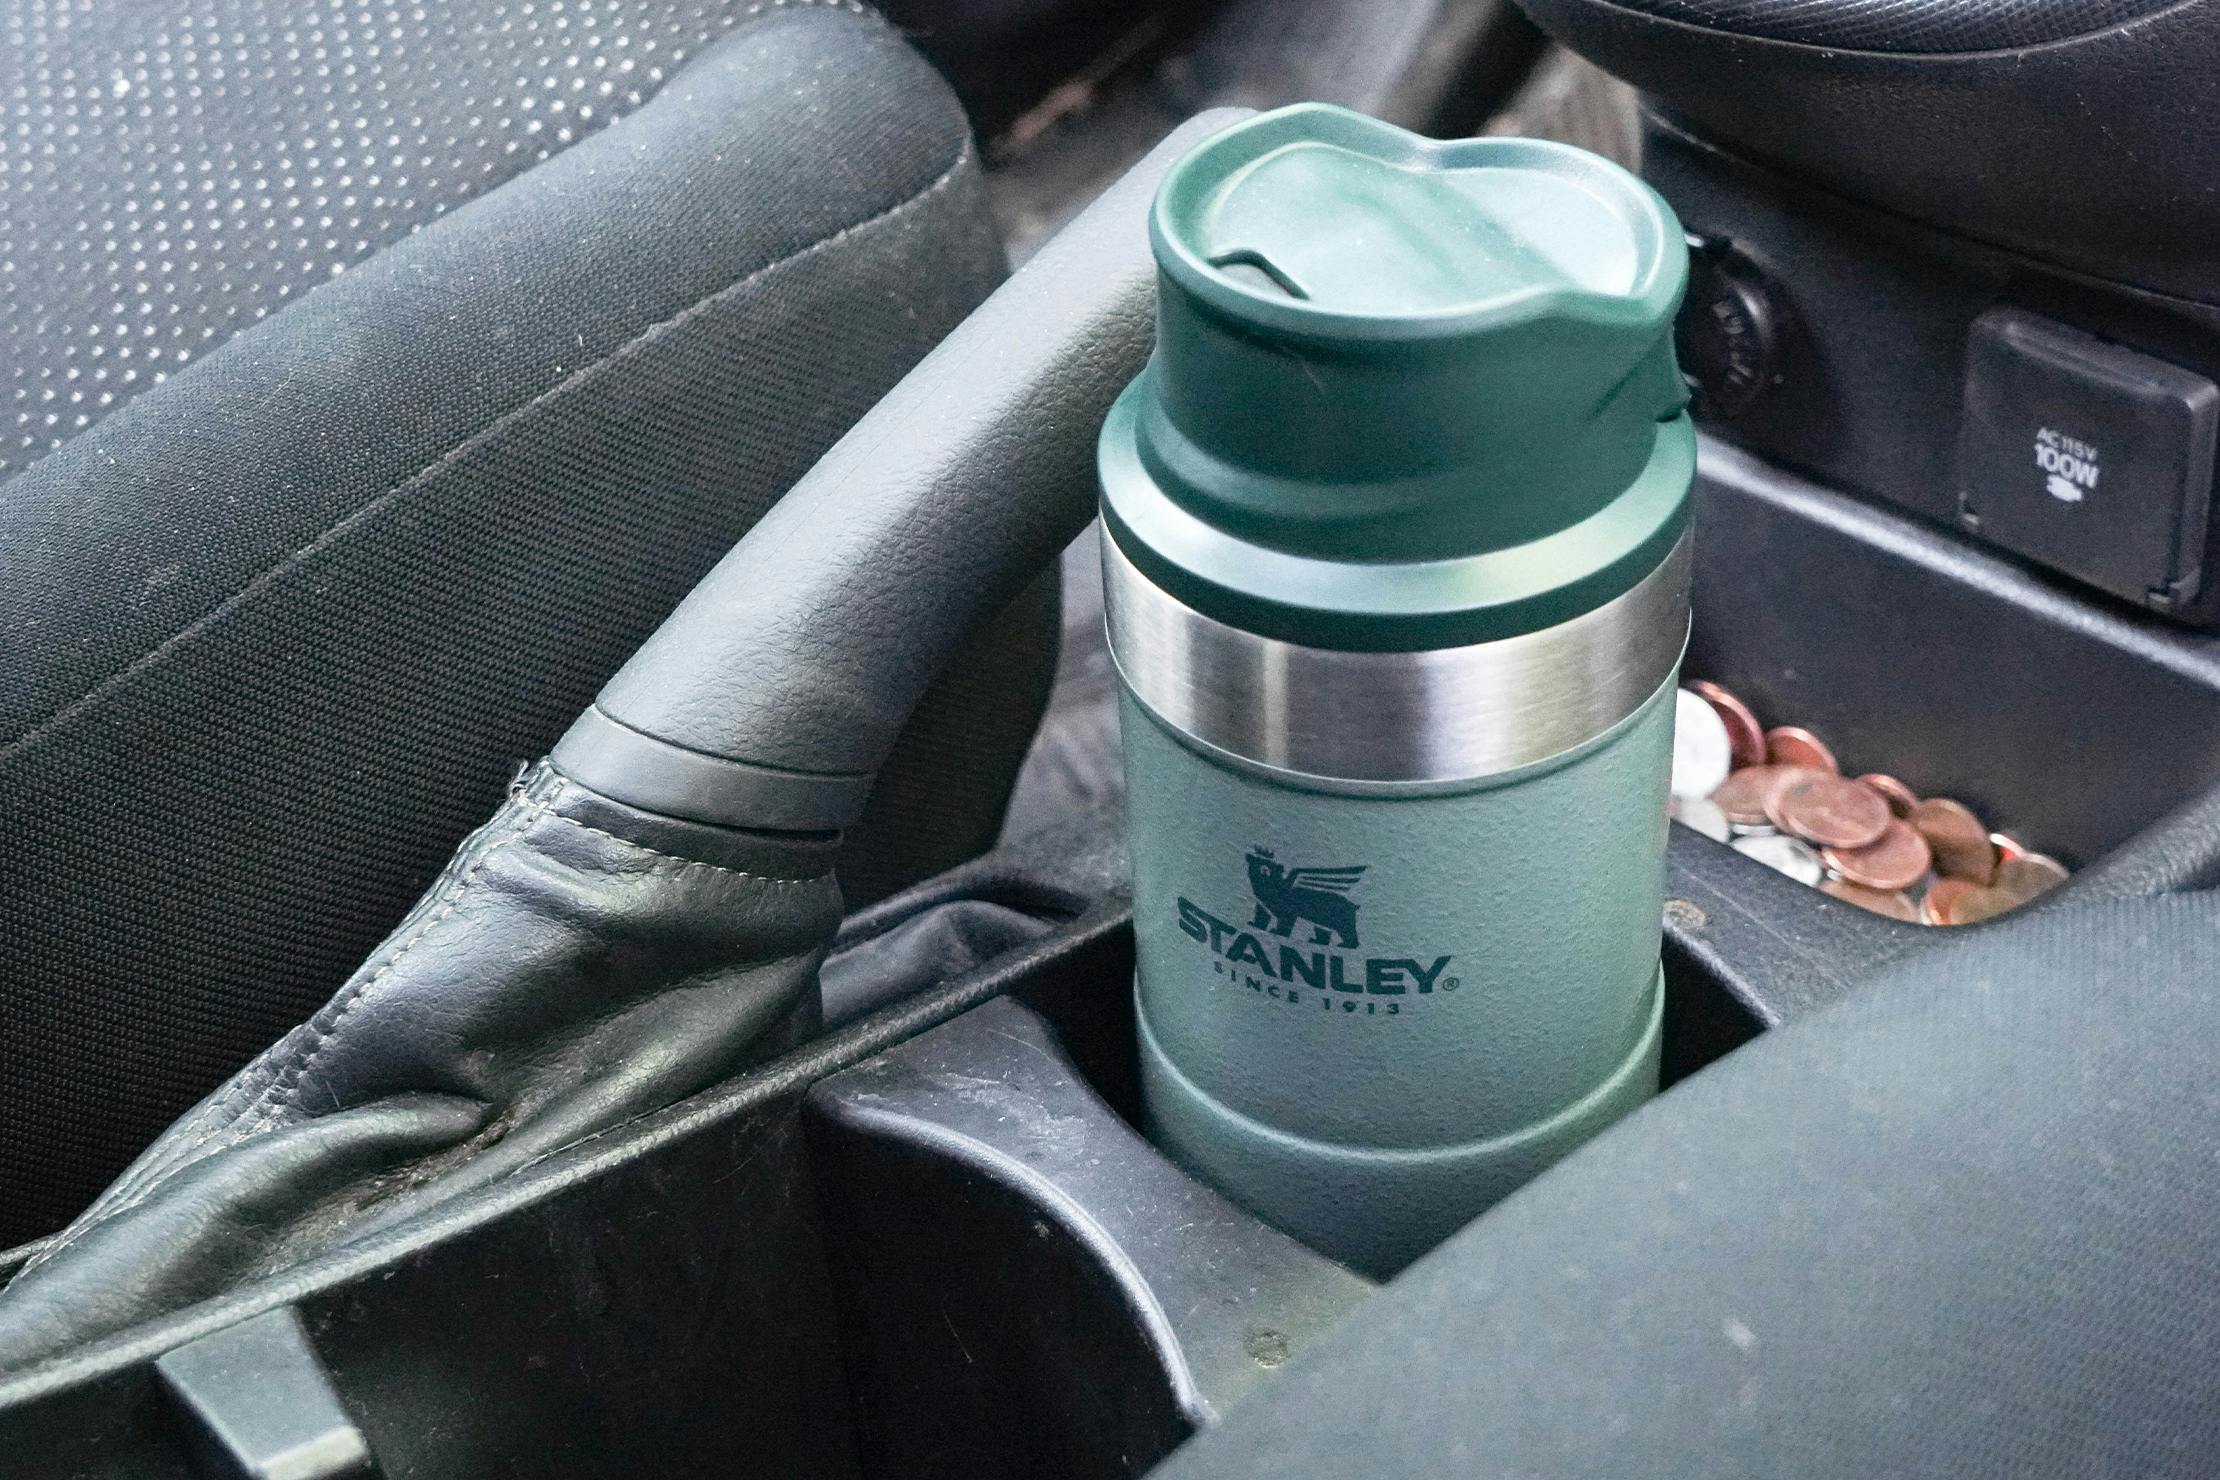 Stanley Classic TriggerAction Travel Mug 12oz Review